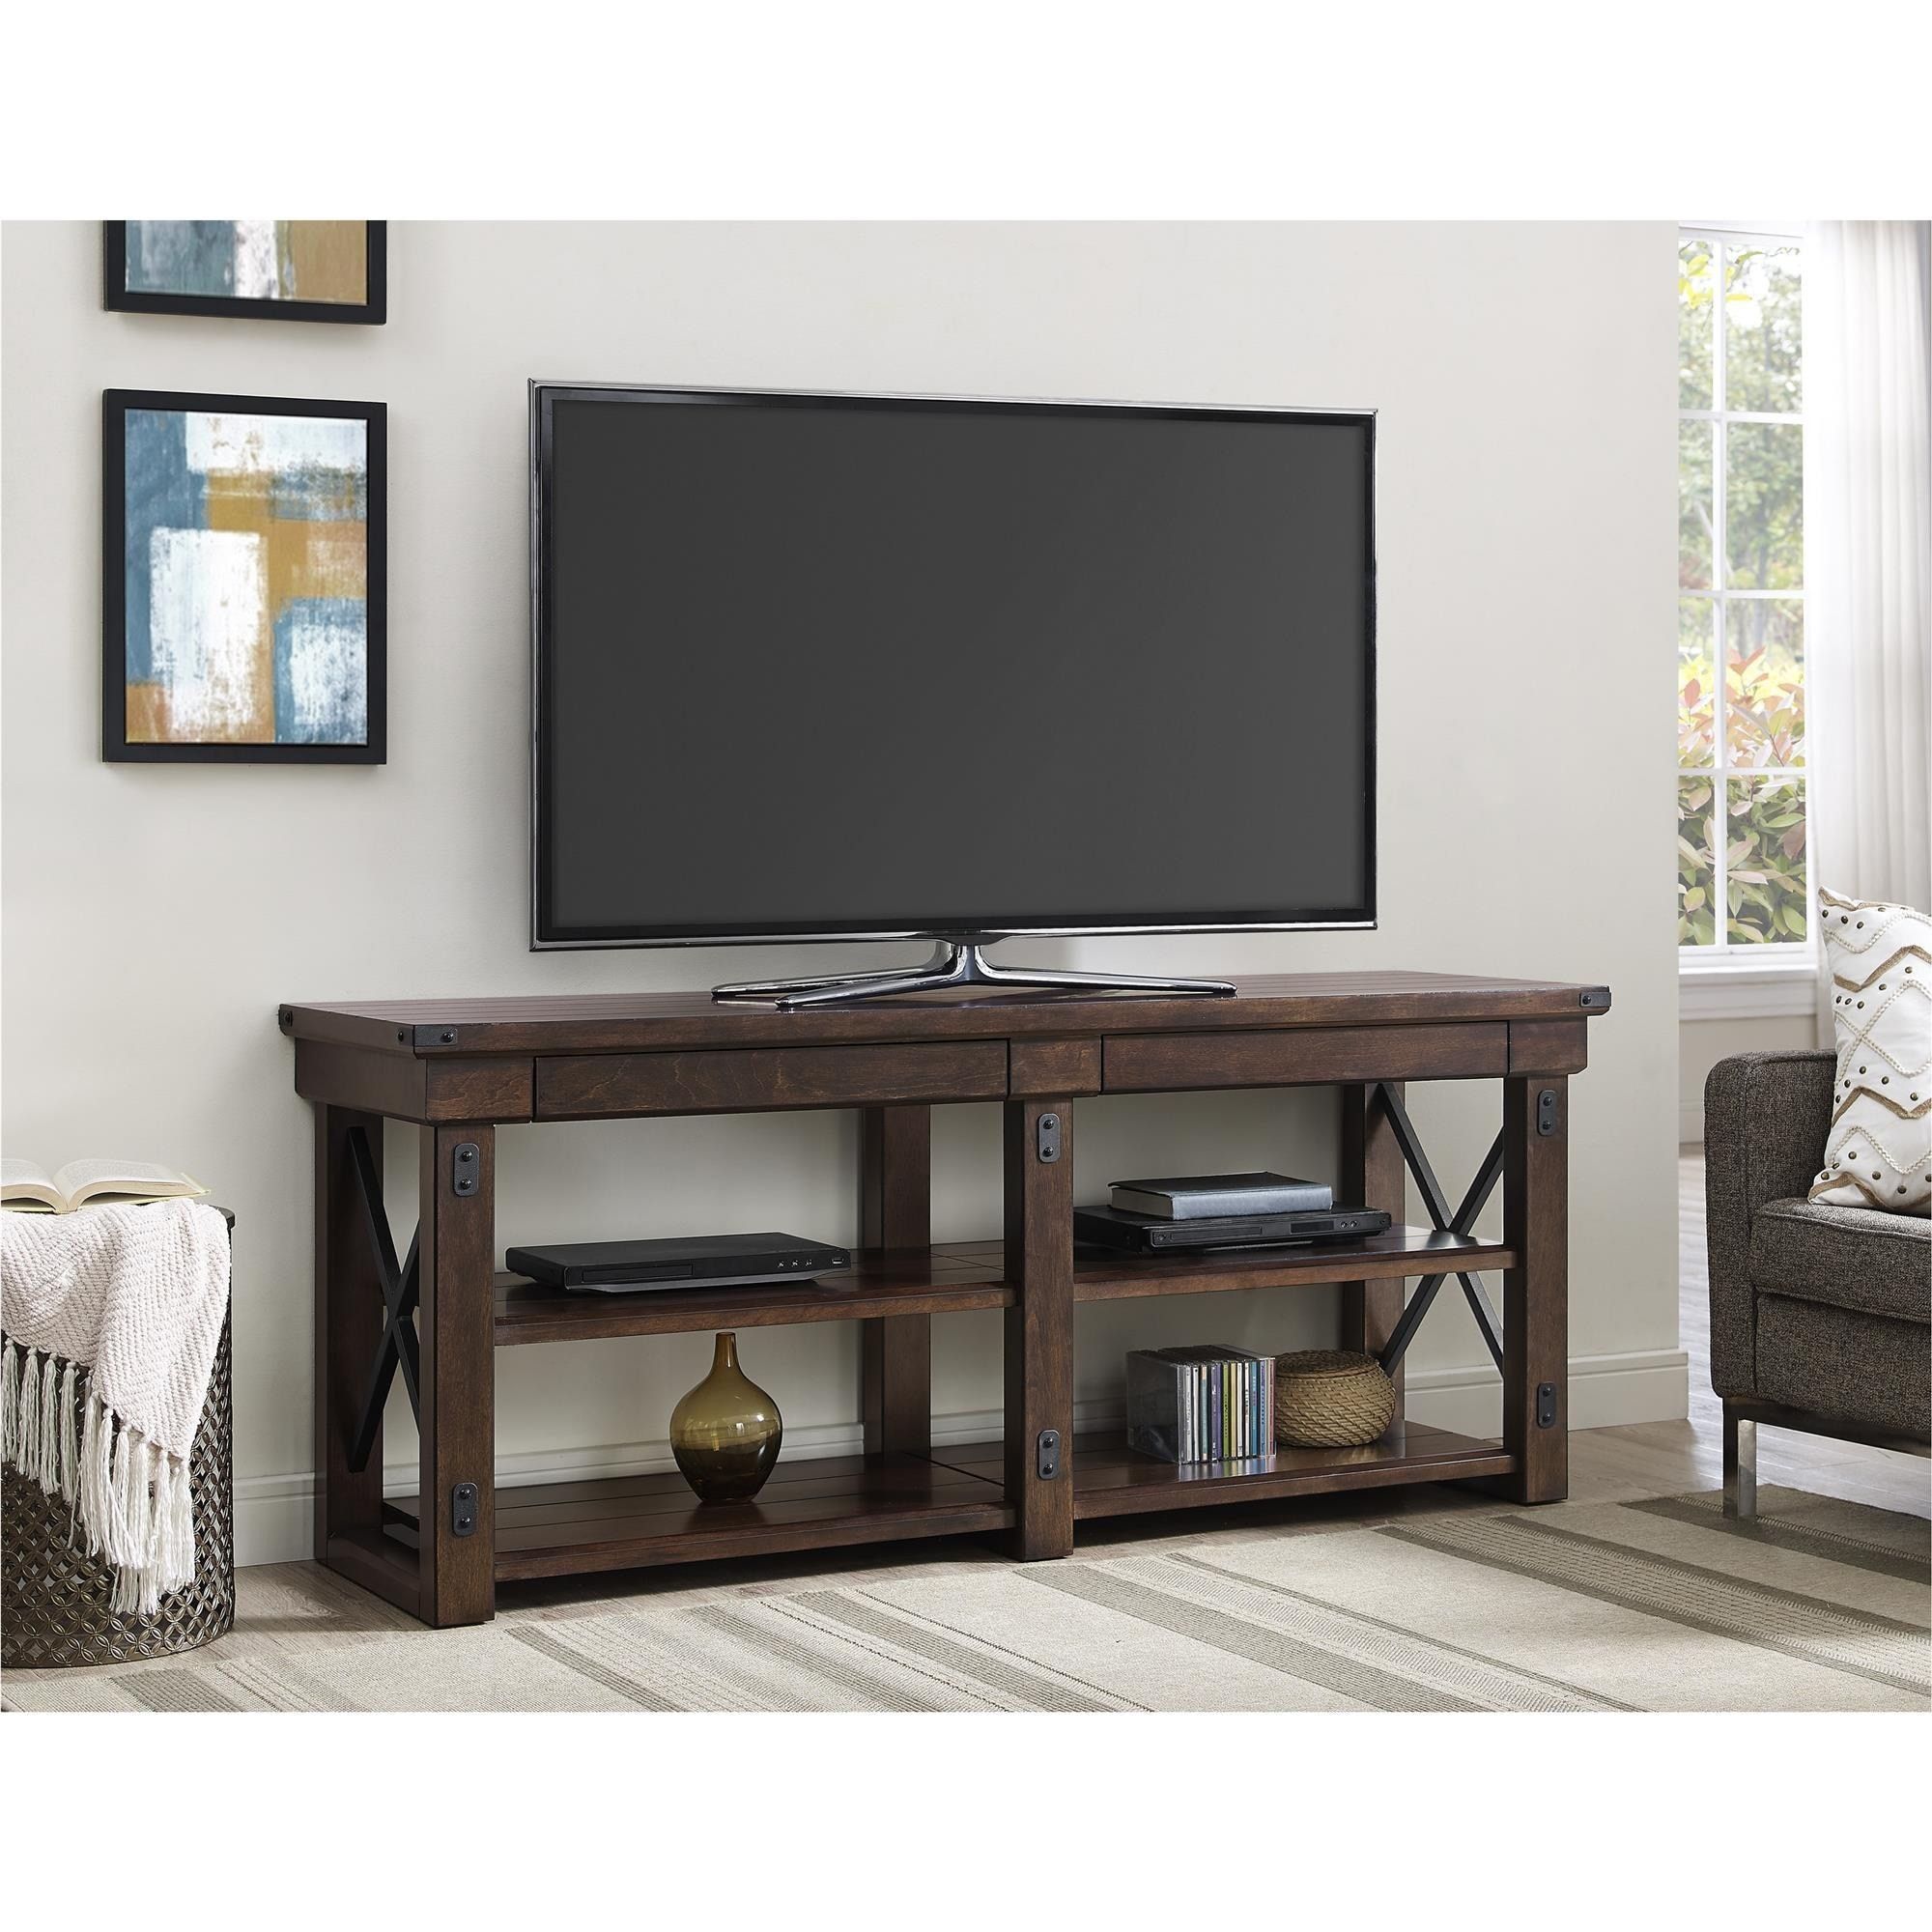 Online Shopping – Bedding, Furniture, Electronics, Jewelry Within Narrow Tv Stands For Flat Screens (Photo 7 of 15)